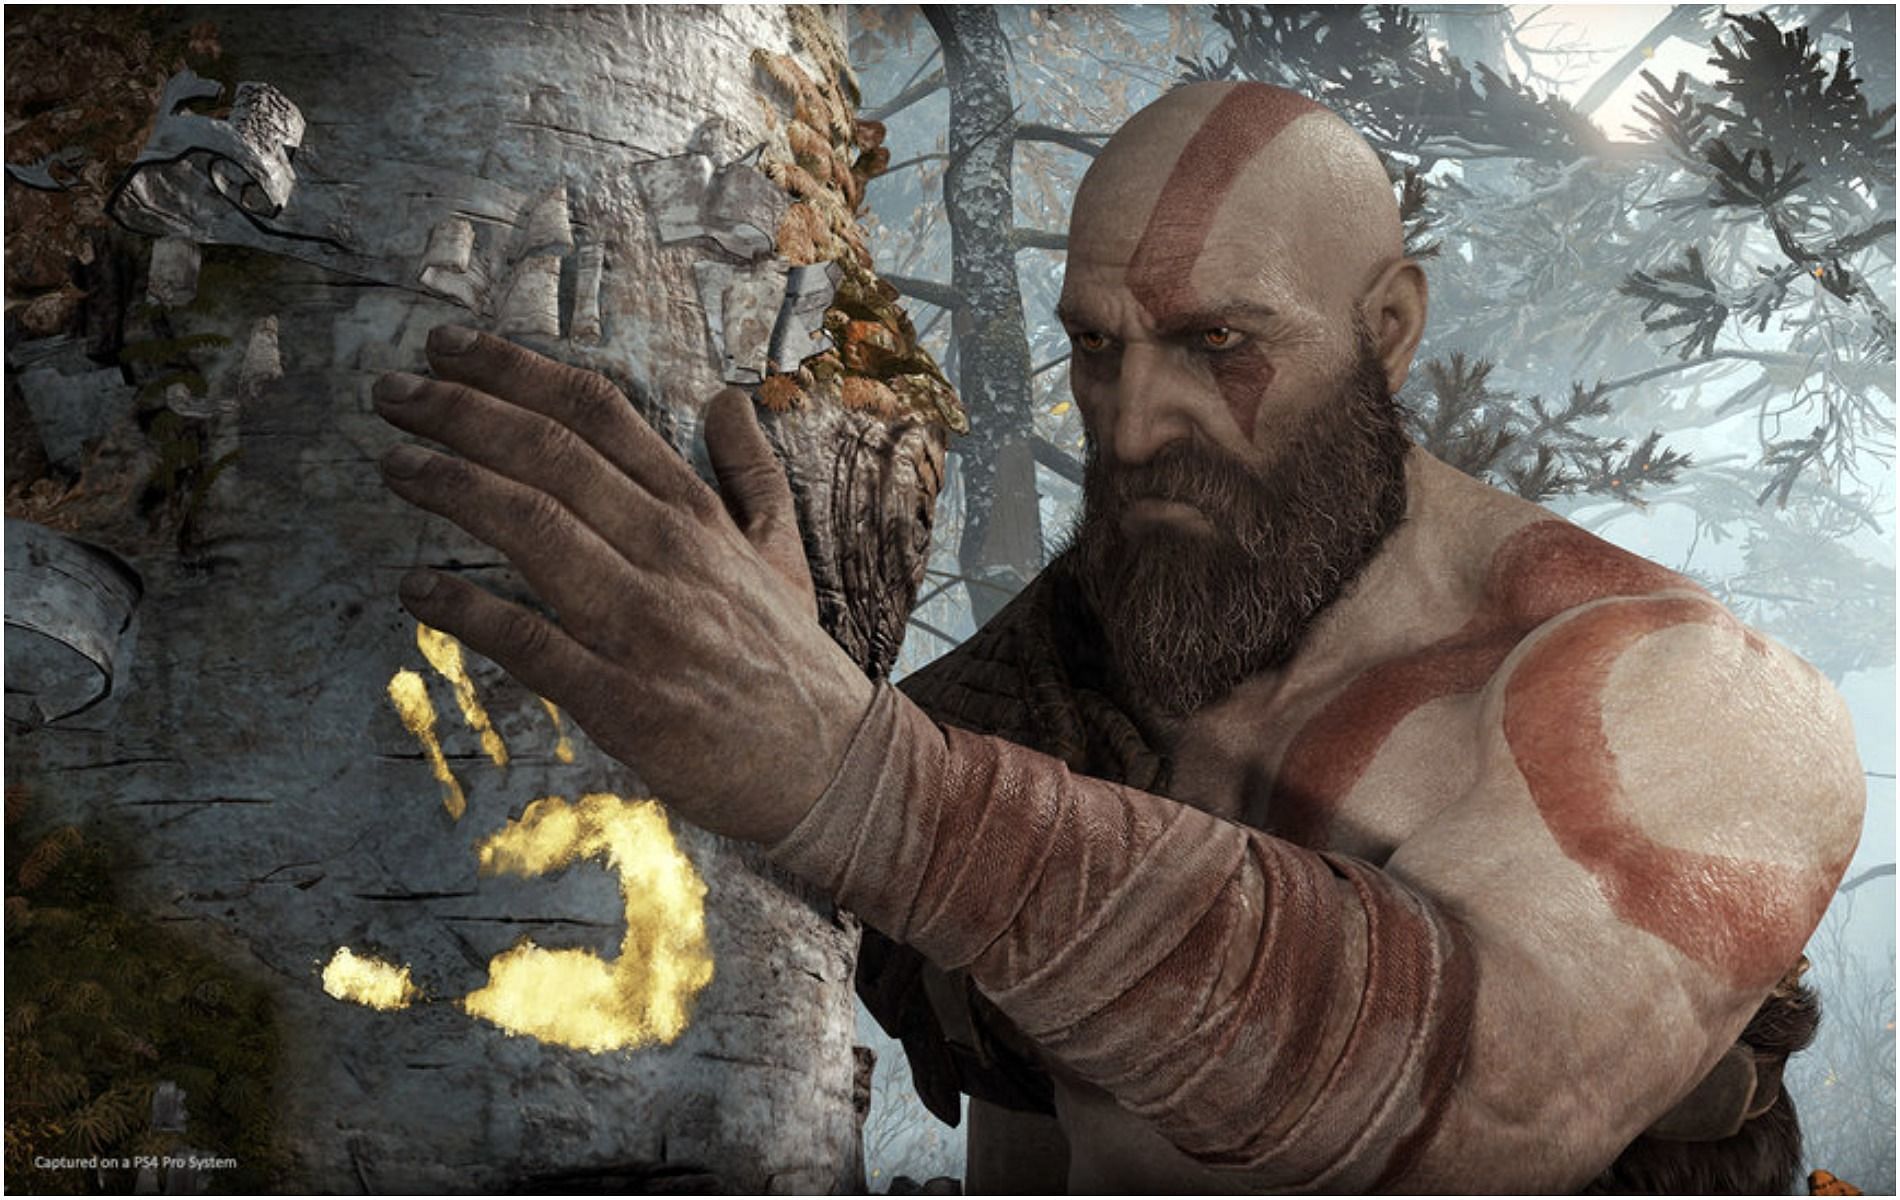 The God of War PC port saw almost 50,000 concurrent users on Steam (Image via Santa Monica Studio)